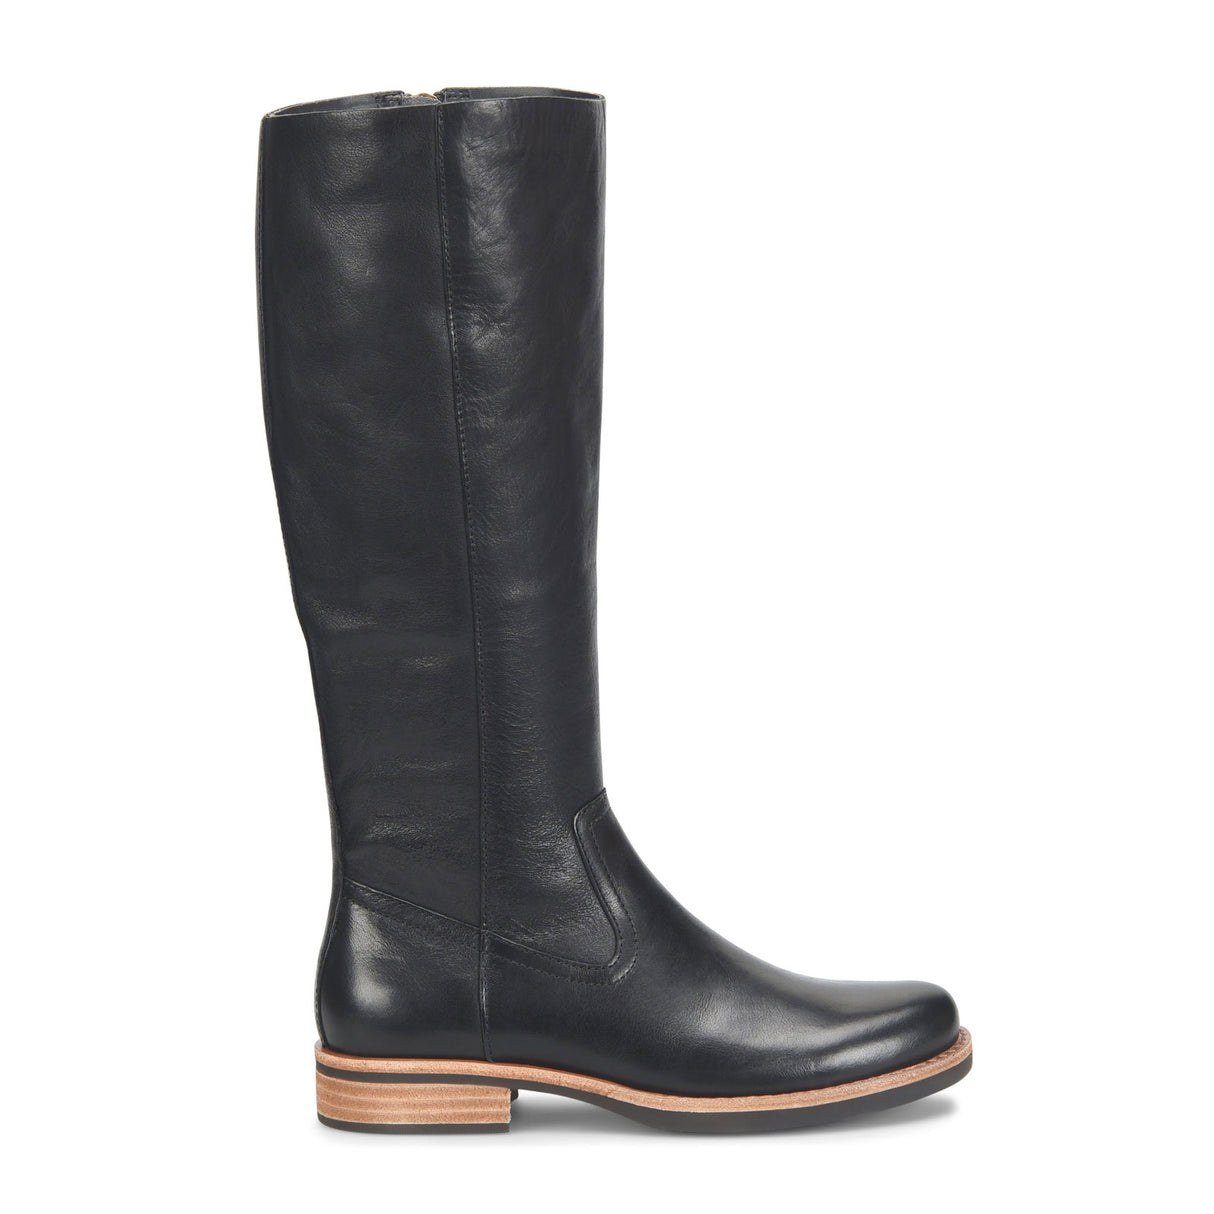 Kork-Ease Sydney Tall Boot (Women) - Black Boots - Fashion - The Heel Shoe Fitters